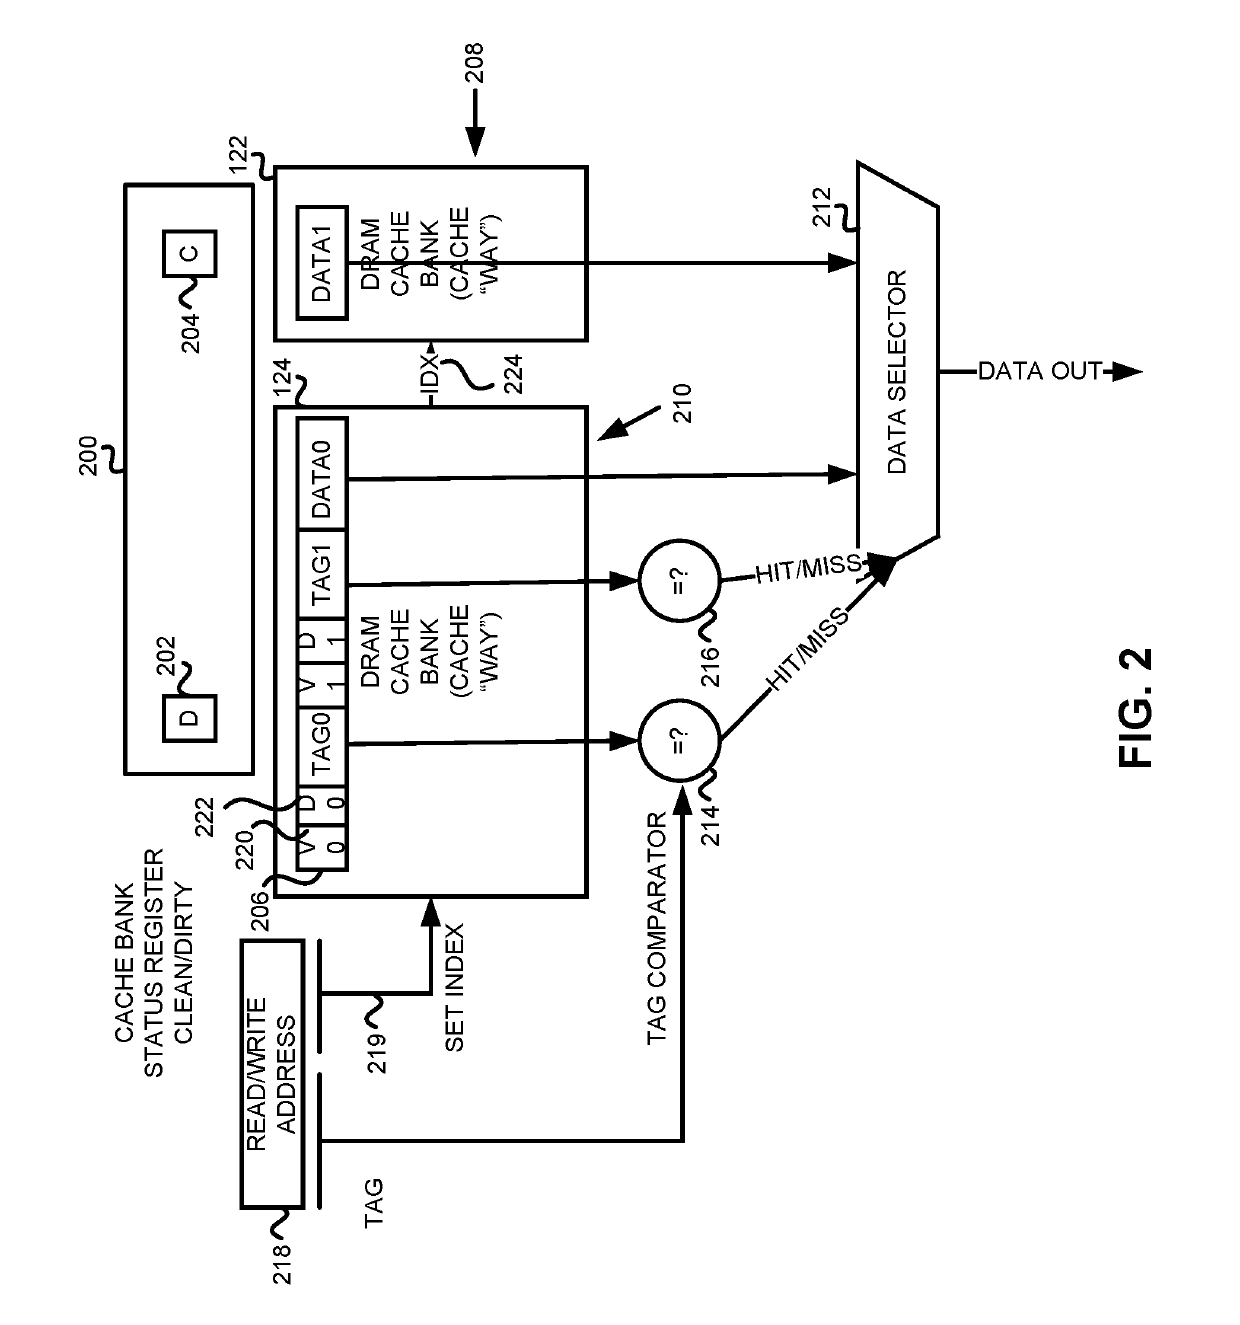 Method and apparatus for controlling cache line storage in cache memory